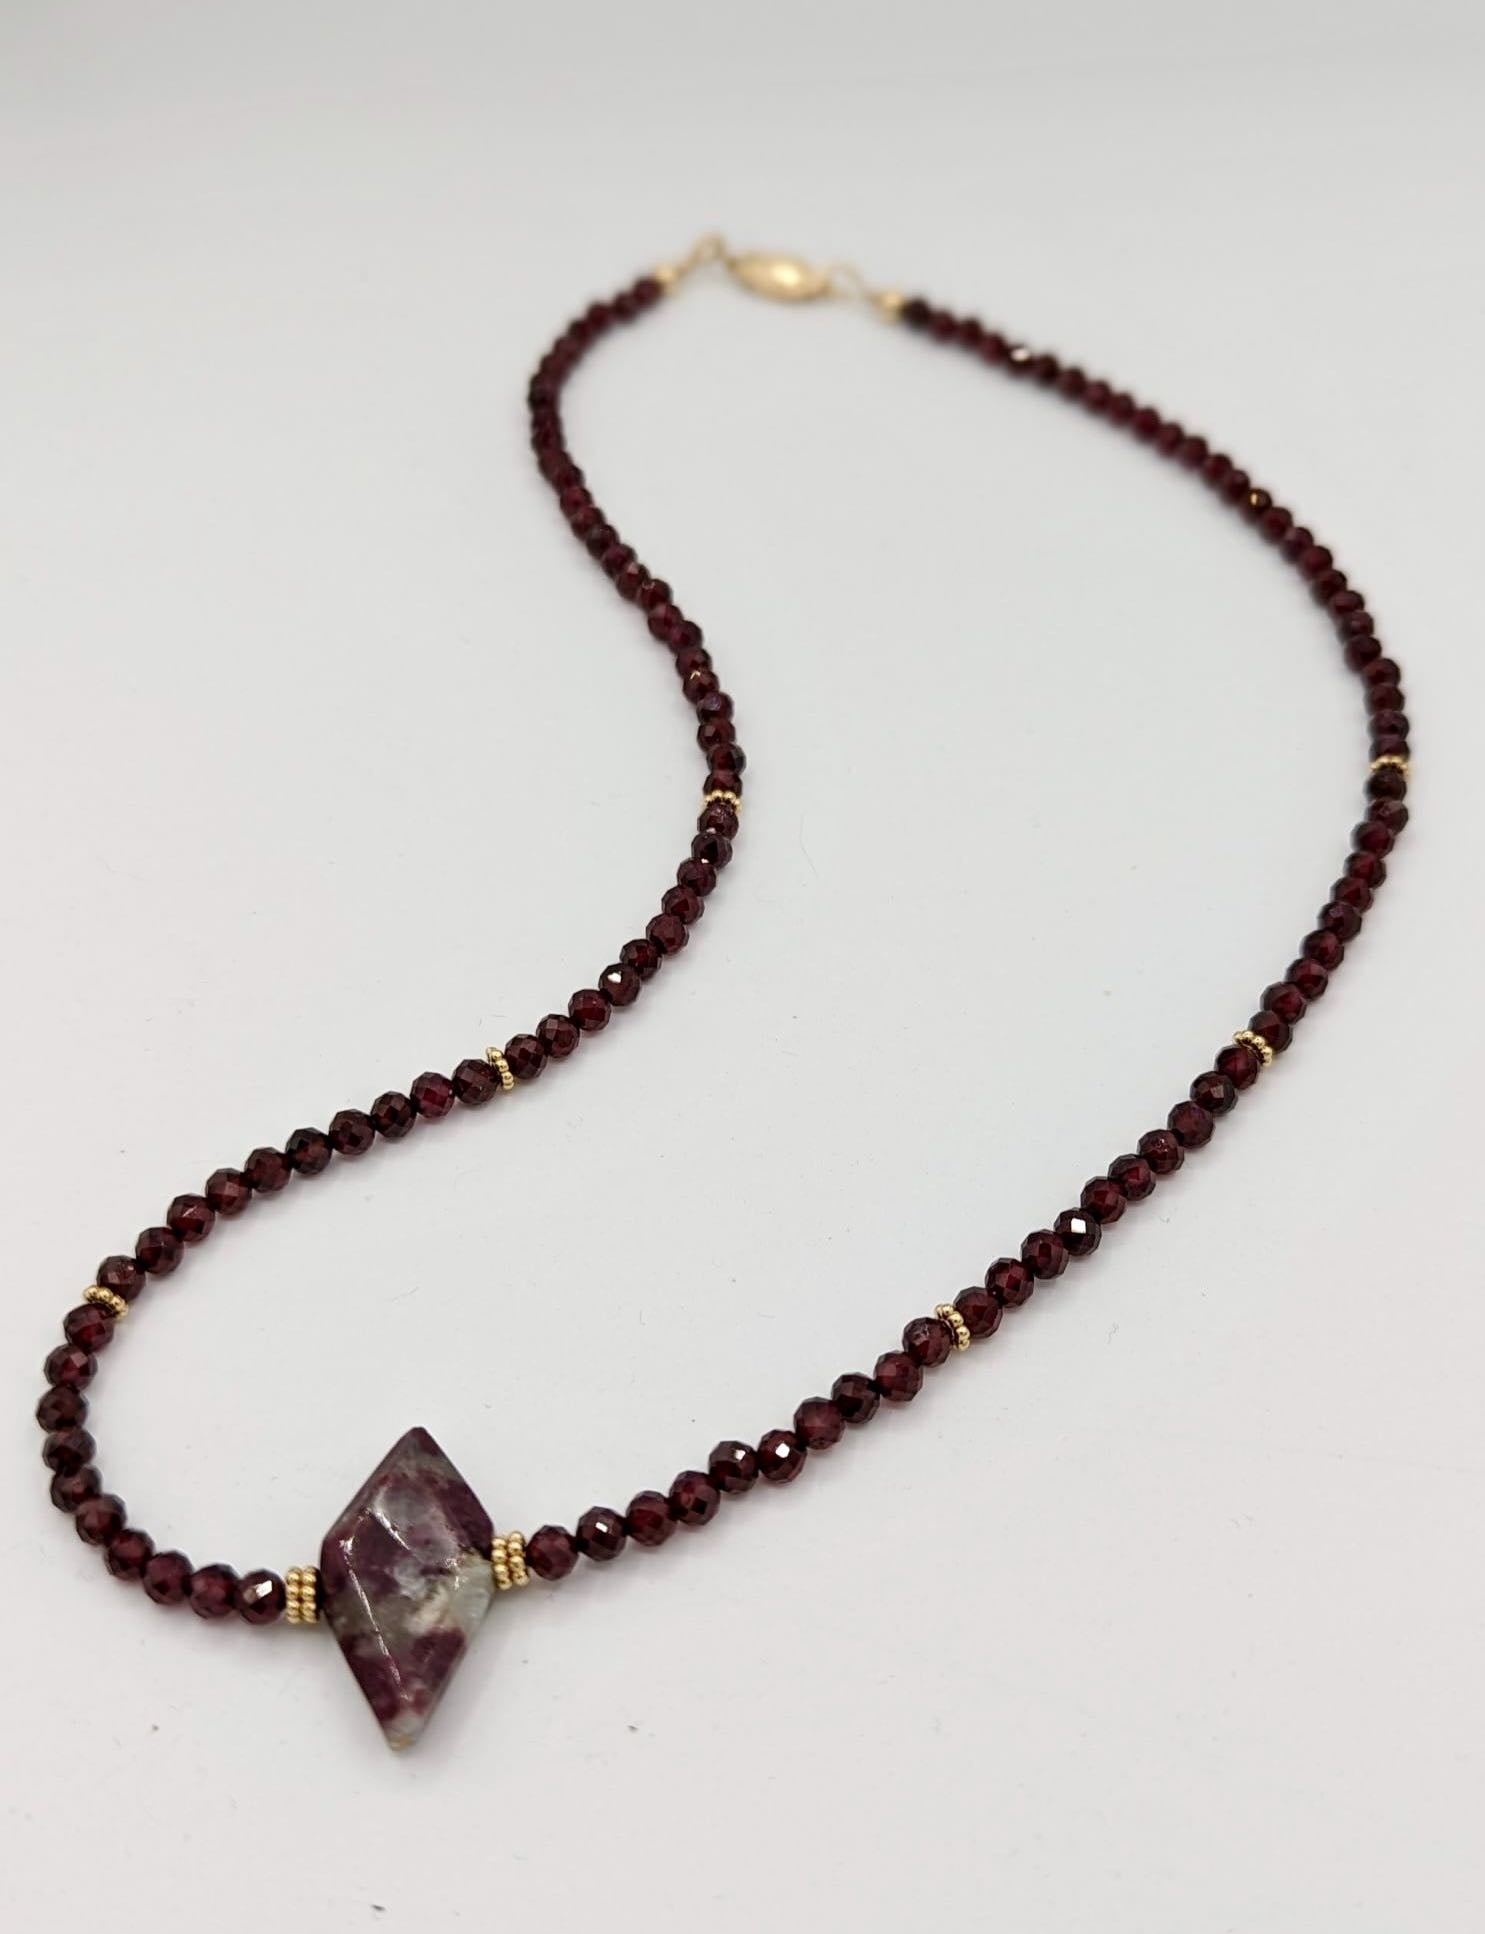 14K Gold-filled Classy Red Tourmaline and Garnet Necklace